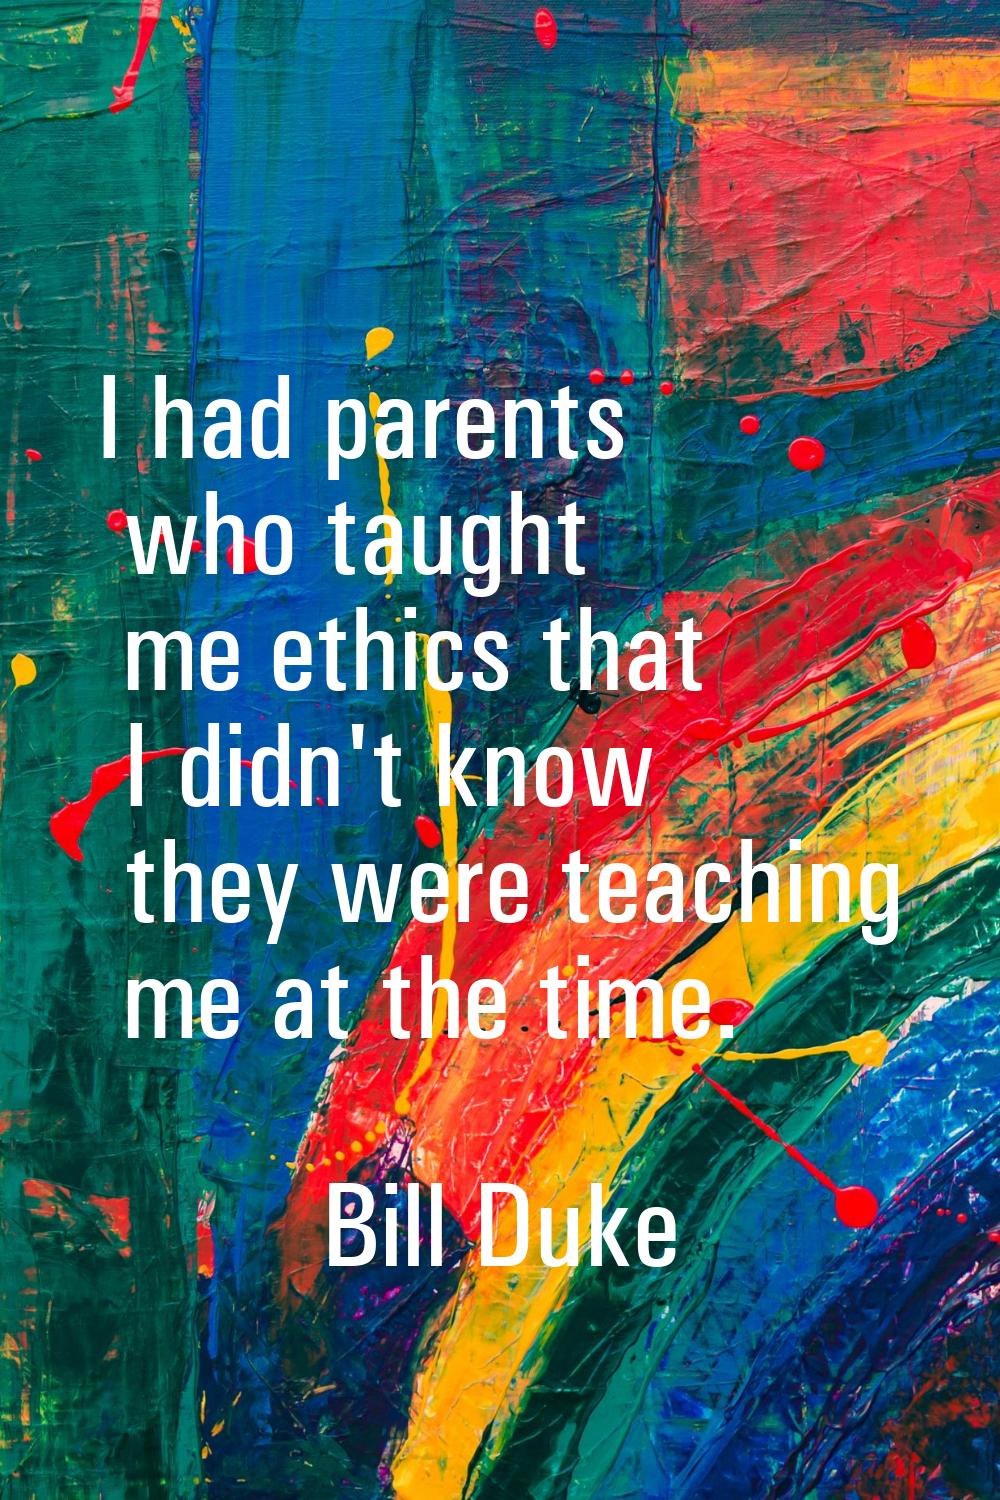 I had parents who taught me ethics that I didn't know they were teaching me at the time.